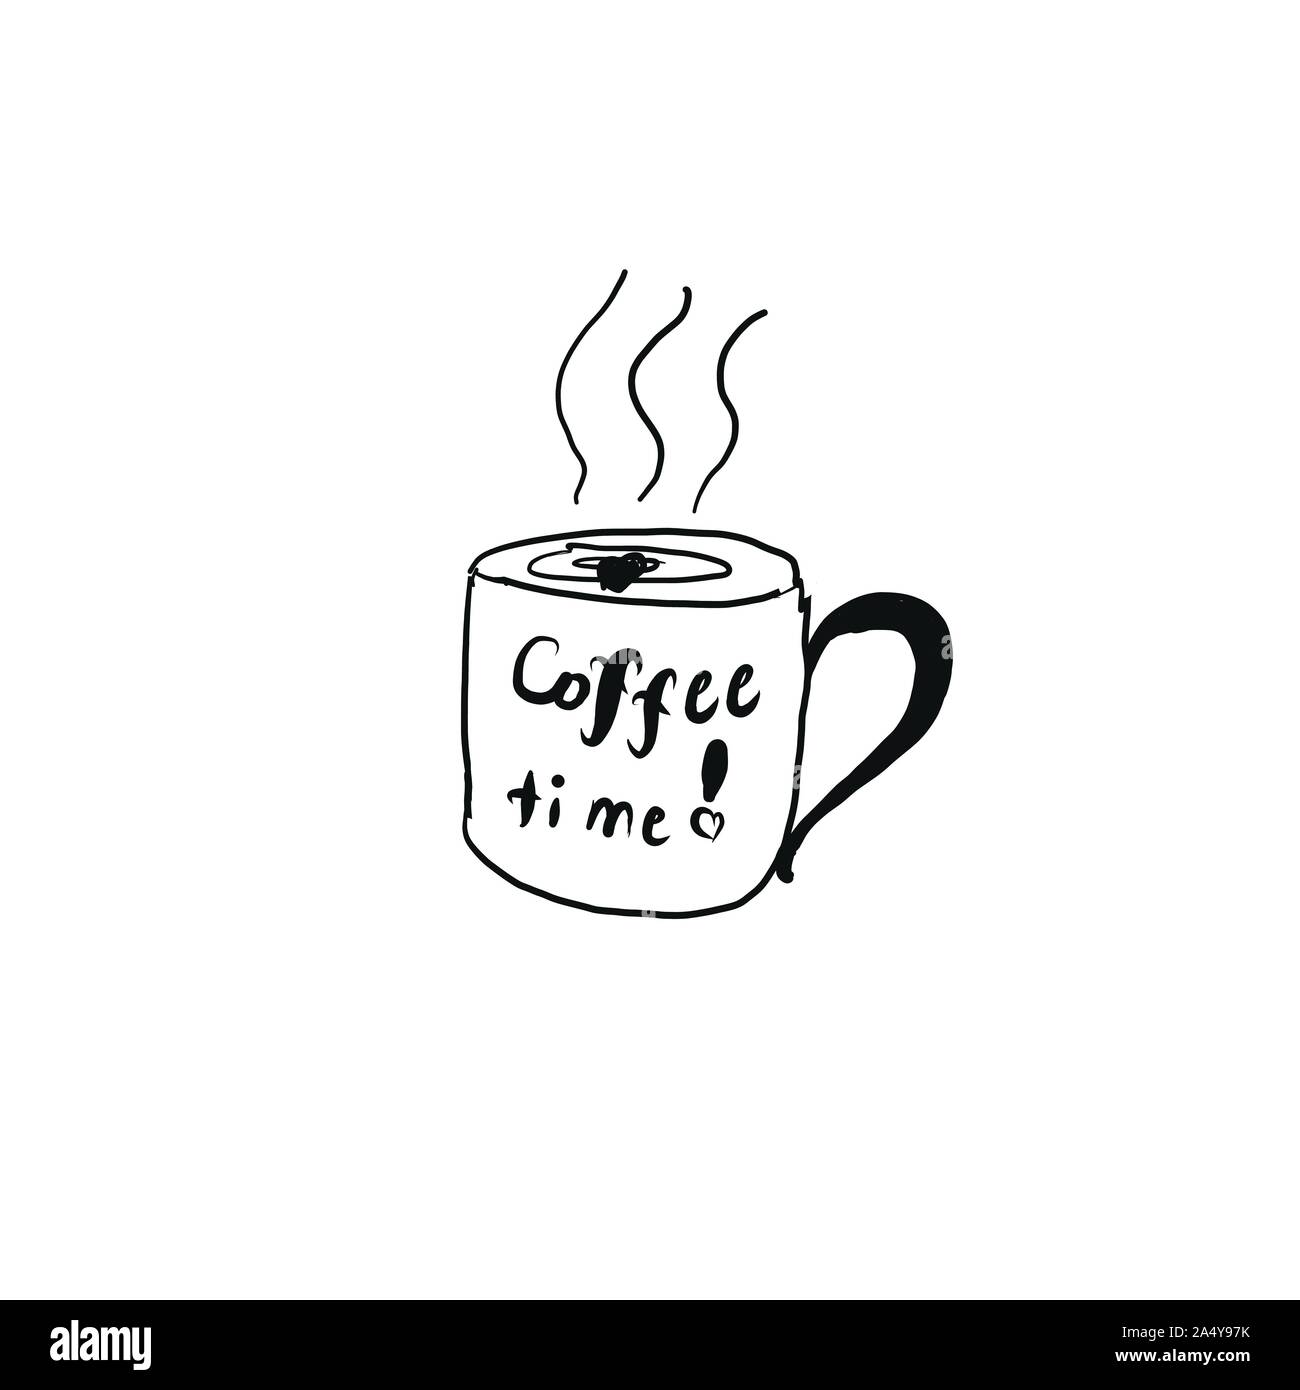 https://c8.alamy.com/comp/2A4Y97K/cup-of-coffee-doodlecoffee-time-used-for-kitchen-cafe-stuff-wallpaper-pattern-fills-web-page-background-surface-textures-vector-illustration-2A4Y97K.jpg